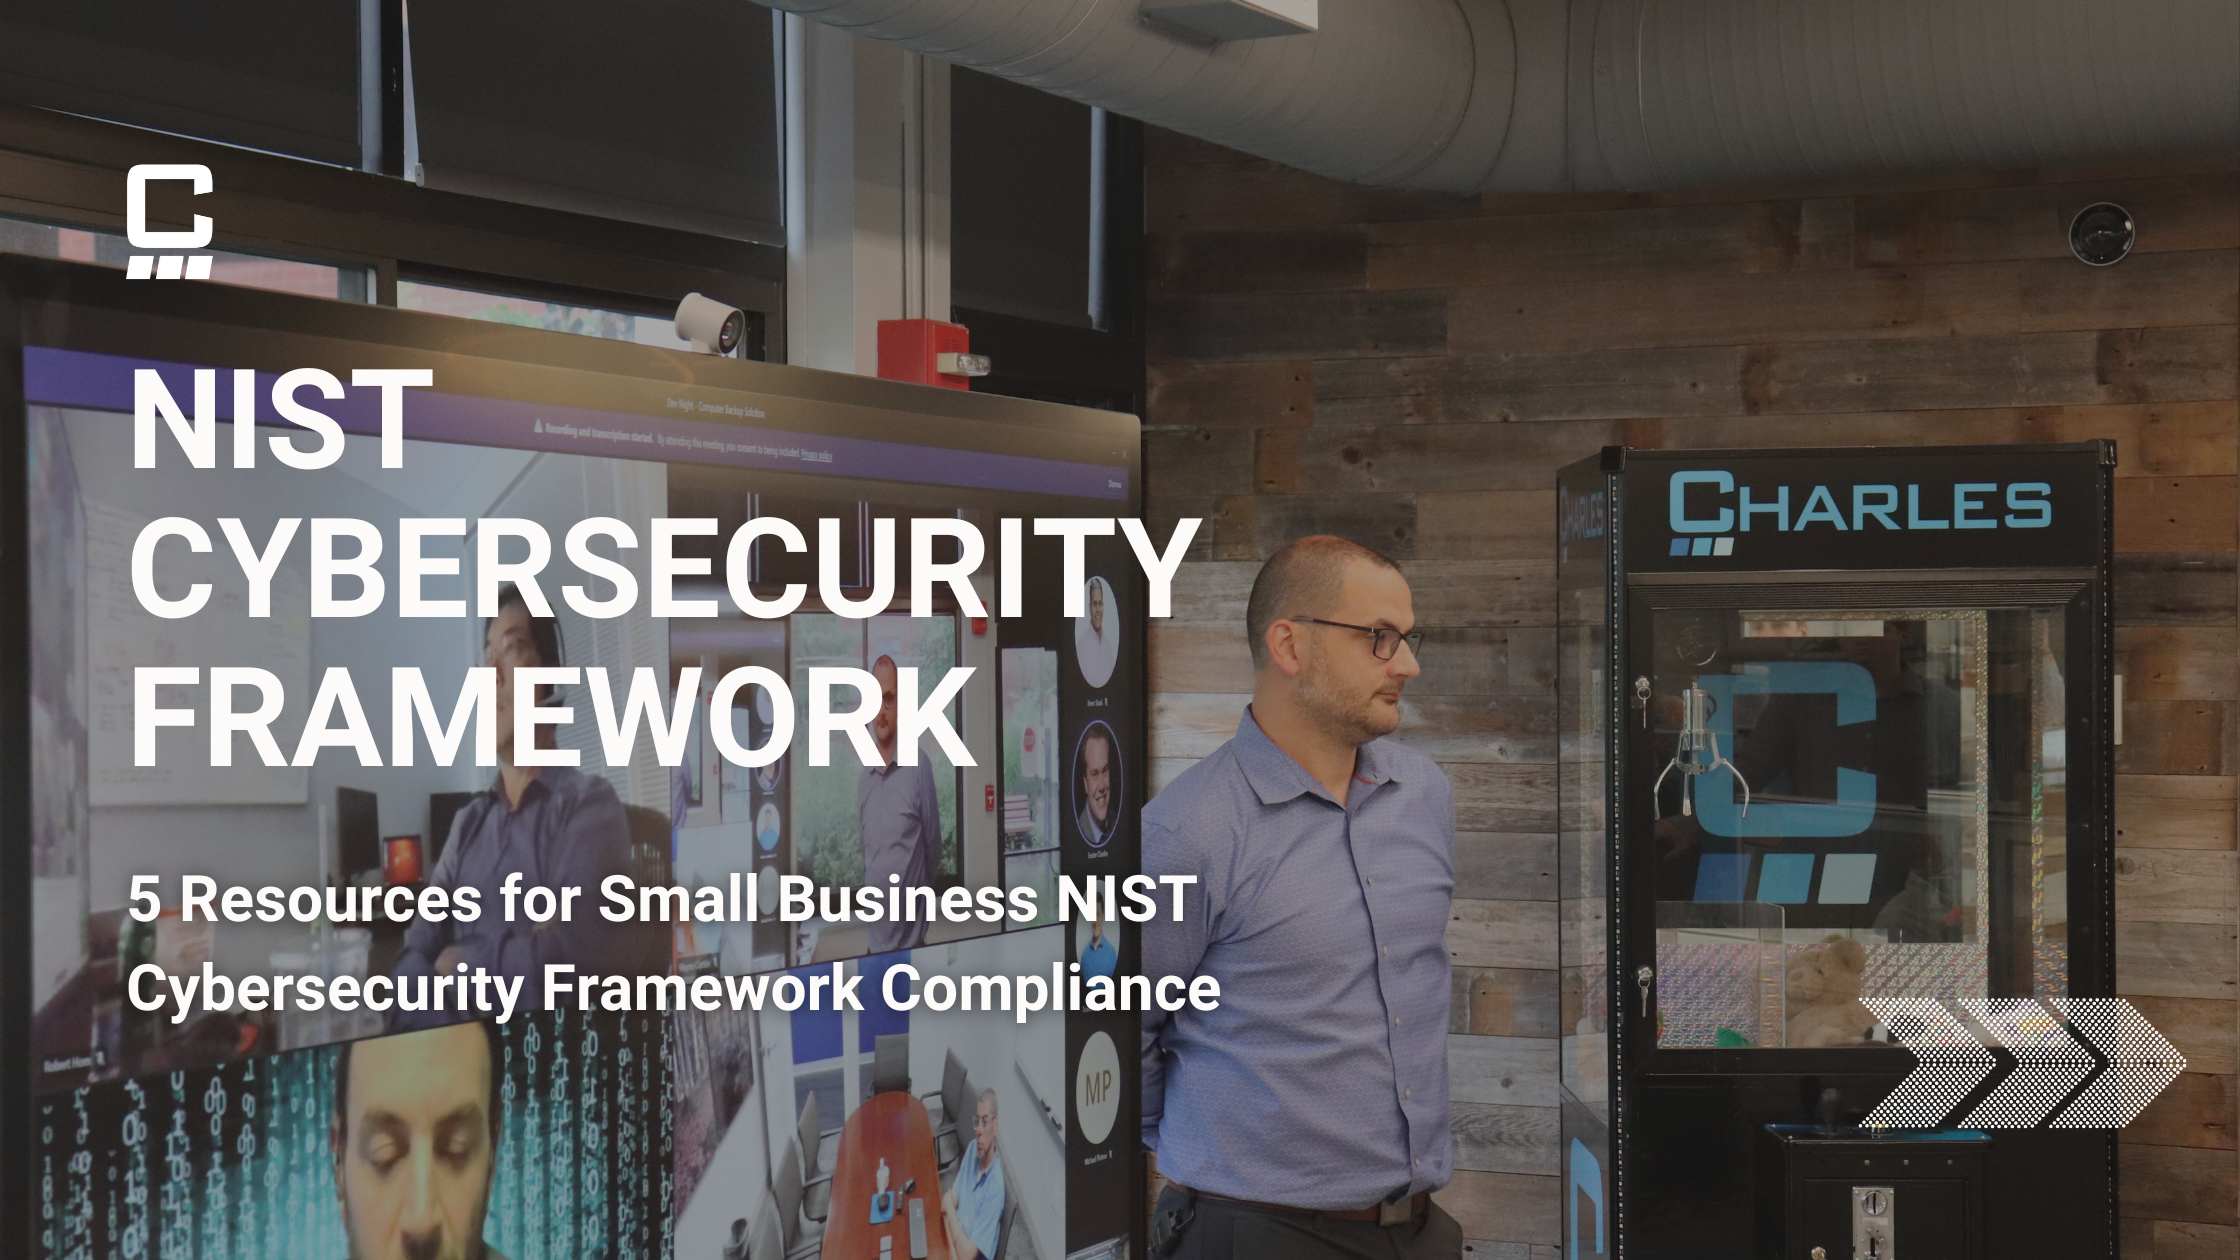 NIST Cybersecurity Framework for Small Business: 5 Useful Resources